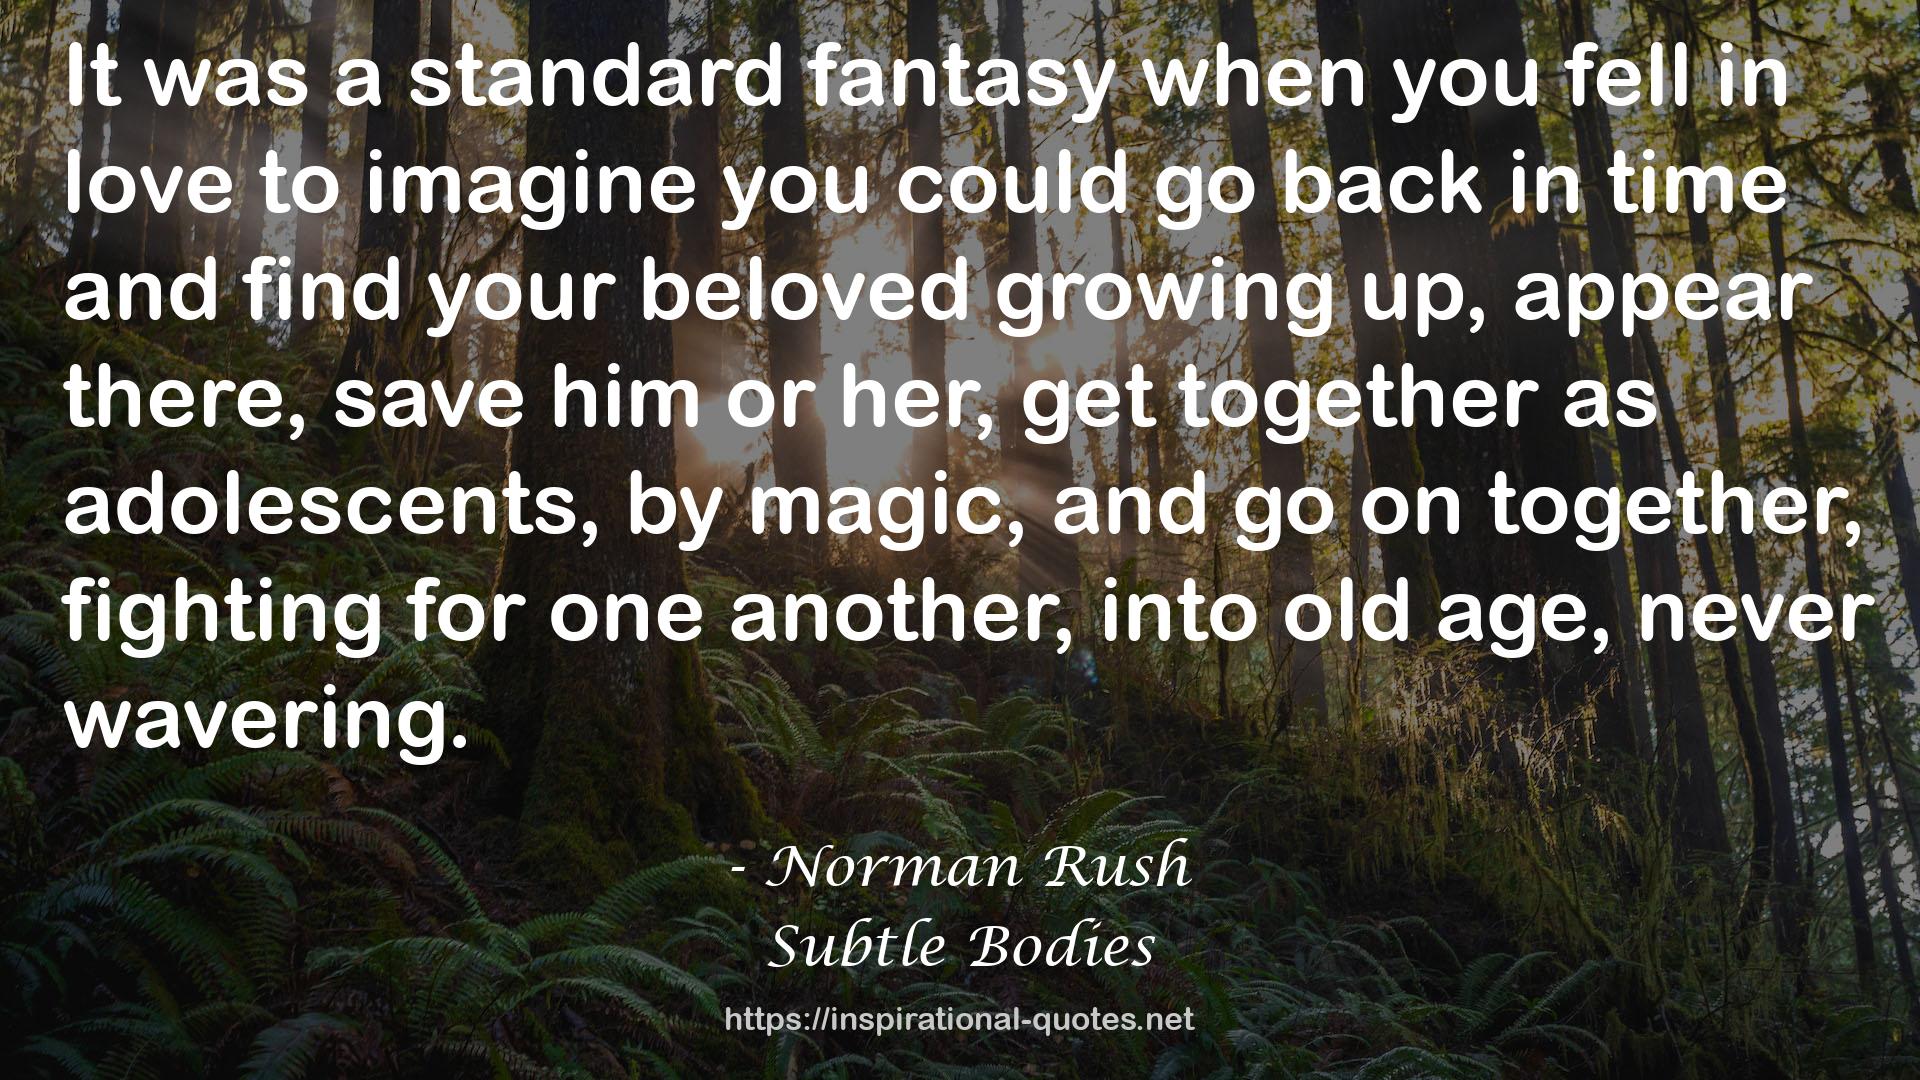 Norman Rush QUOTES